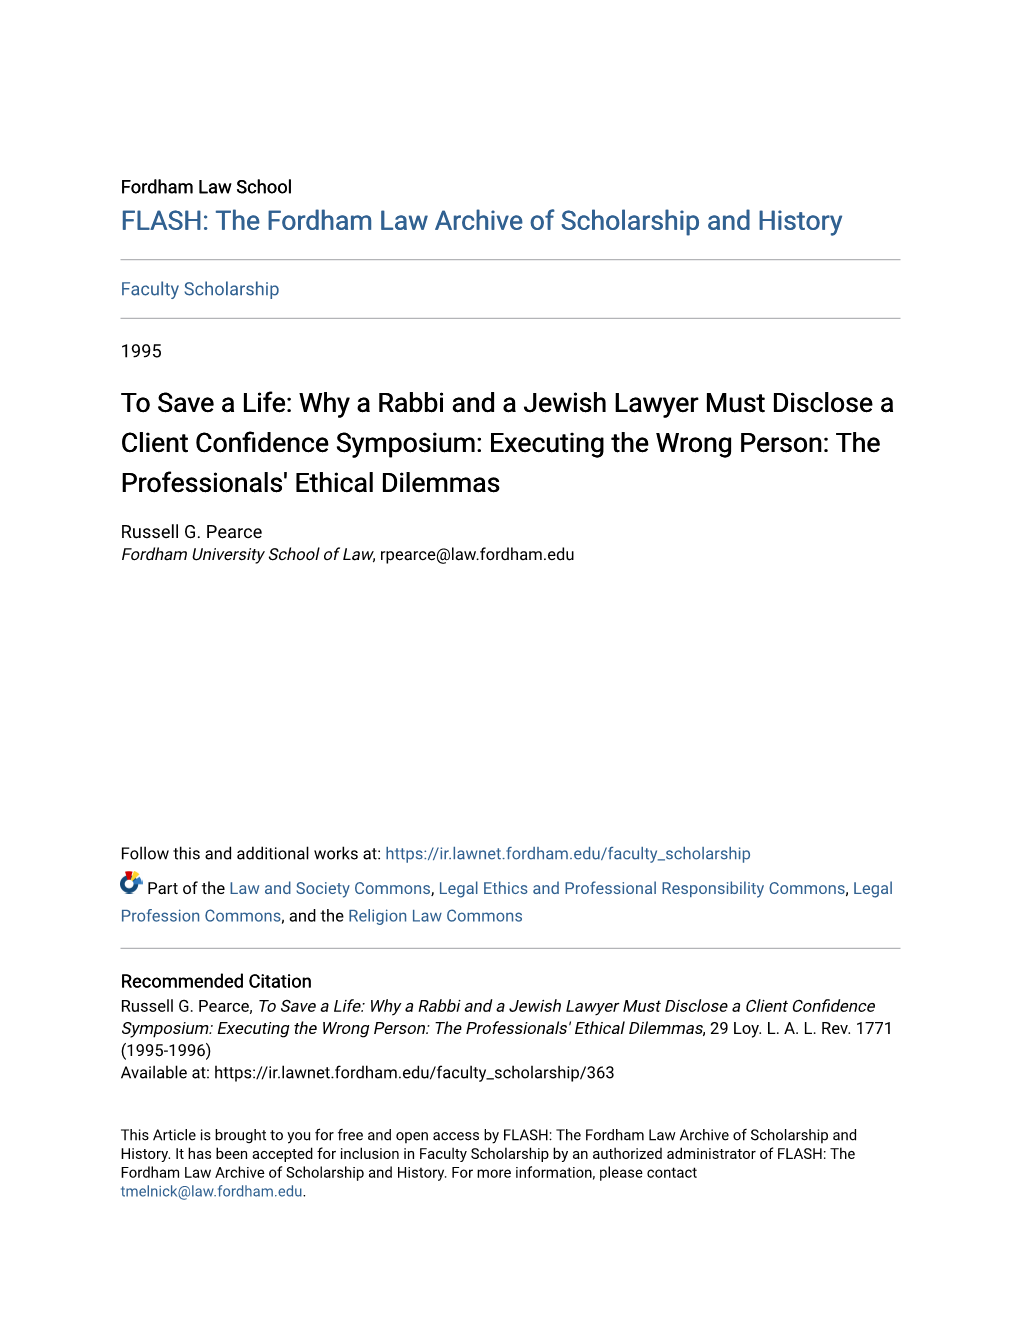 To Save a Life: Why a Rabbi and a Jewish Lawyer Must Disclose a Client Confidence Symposium: Executing the Wrong Person: the Professionals' Ethical Dilemmas